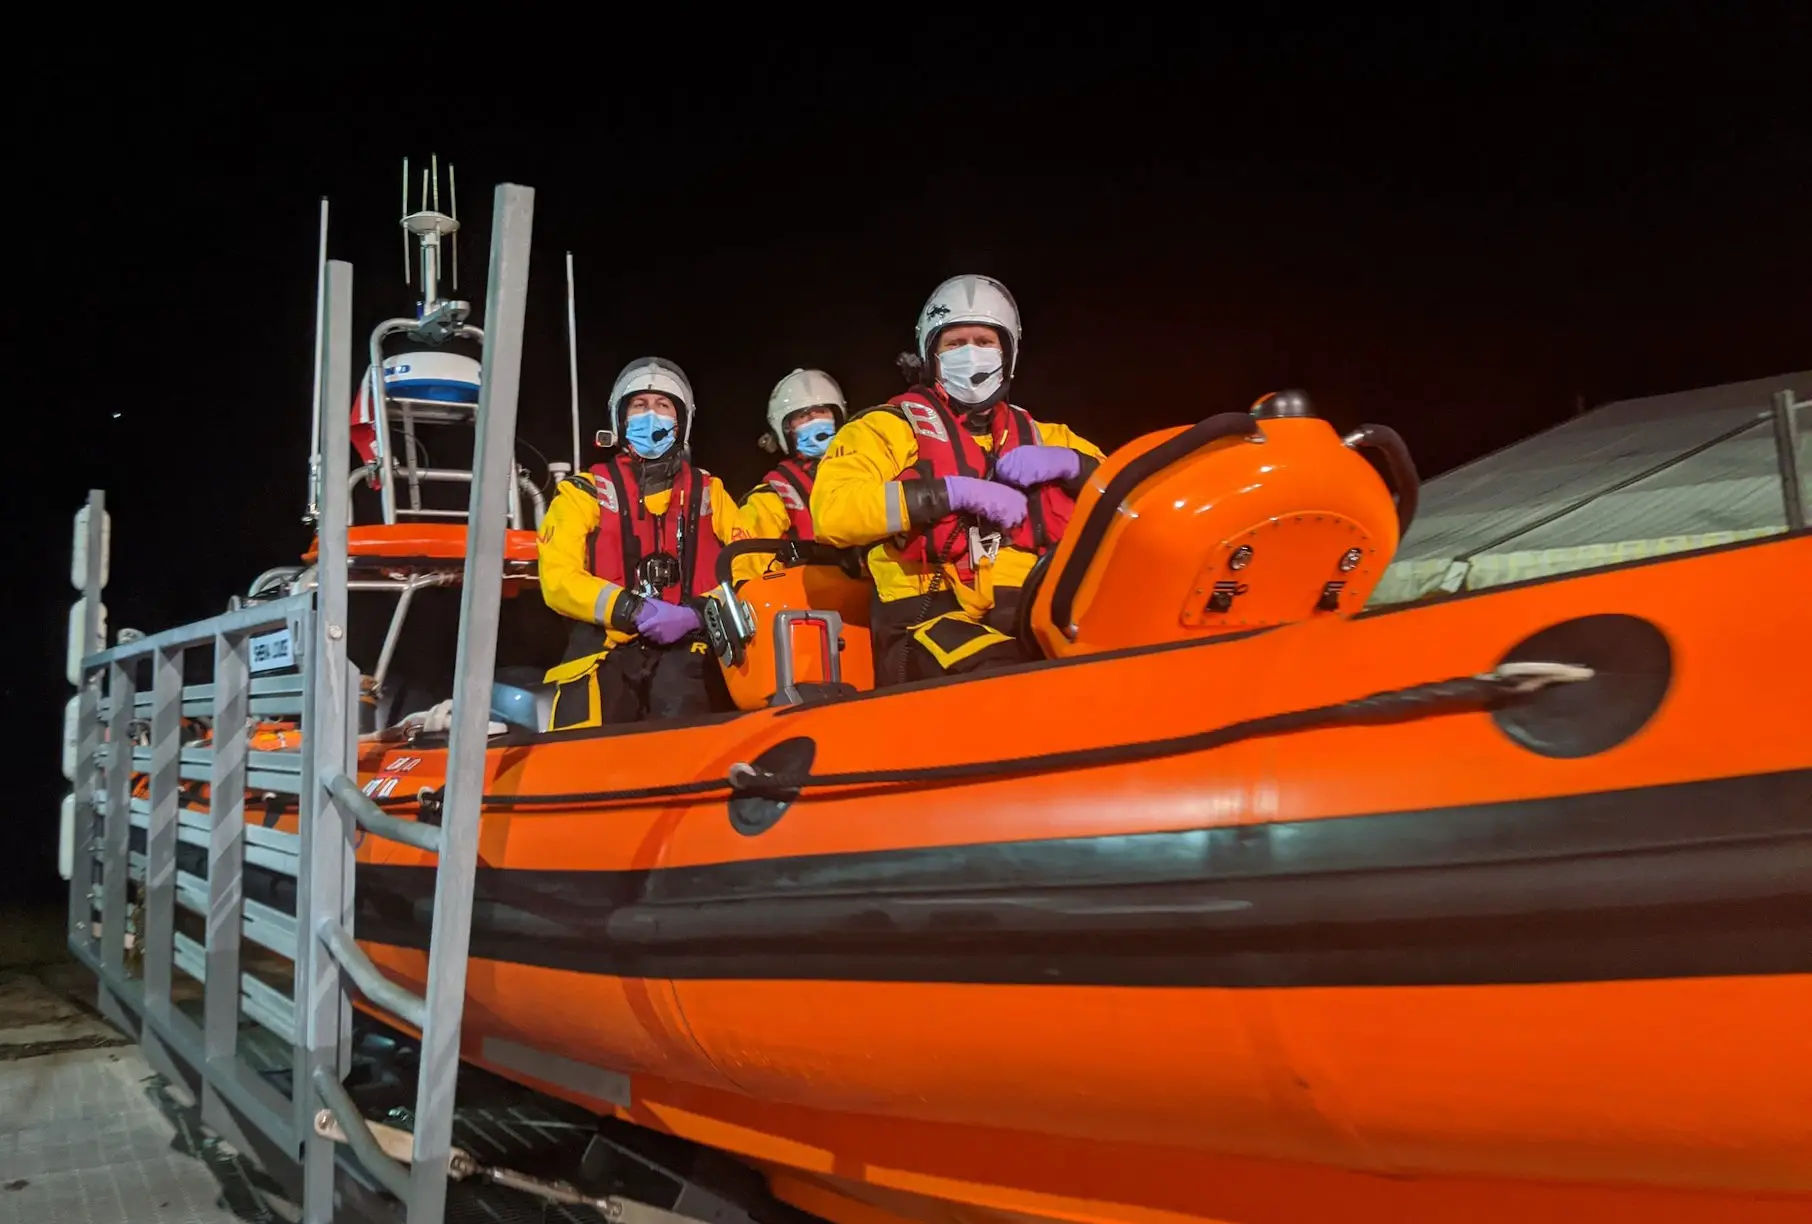 Cowes RNLI crew about to launch and search for missing man